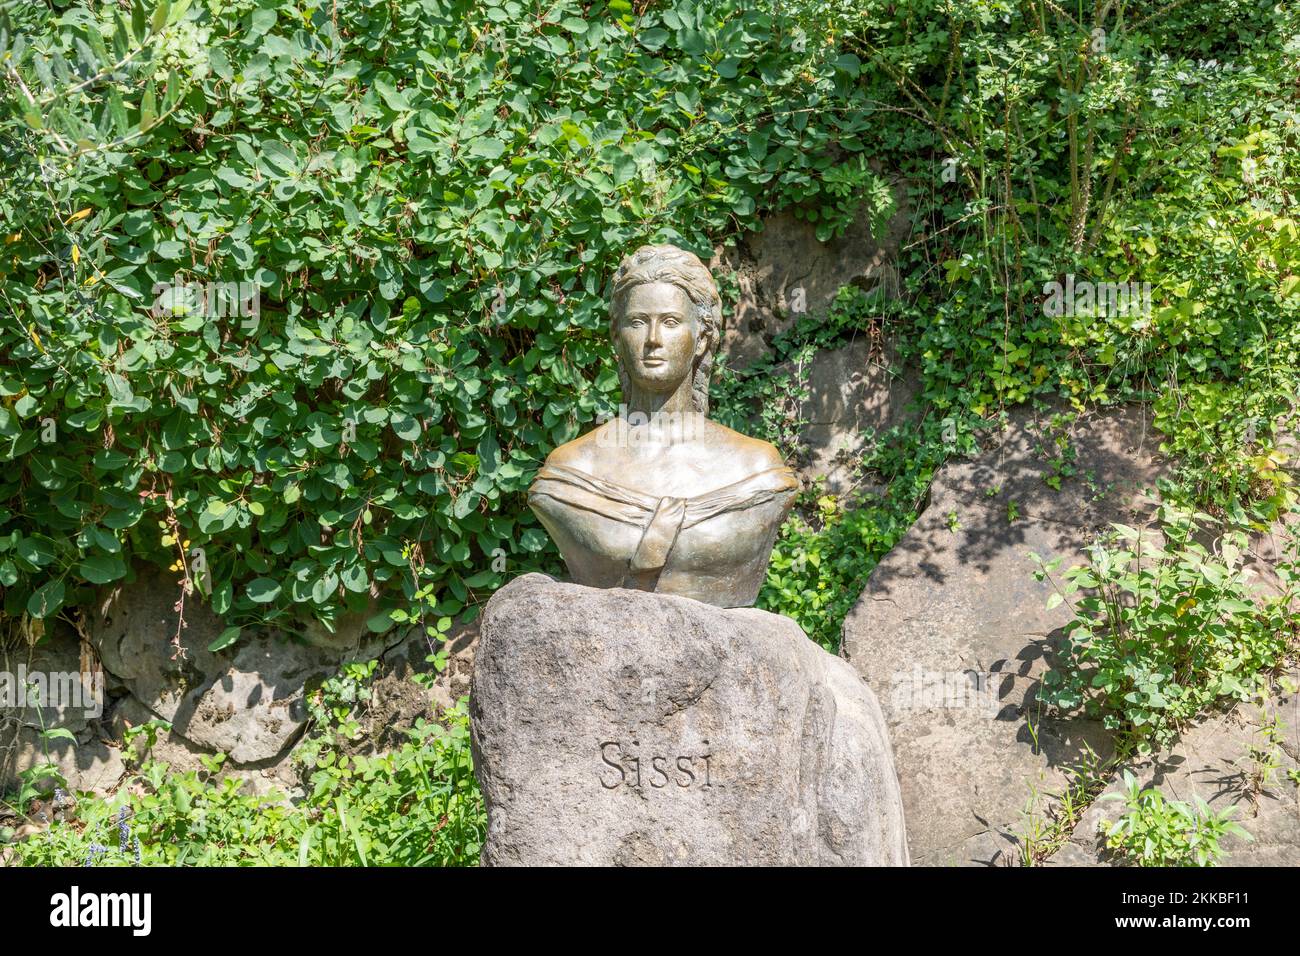 Meran, Province Bolzano/Italy - August 5, 2019: Monument of Queen and Empress Sissi or Sisi in flowerbed. Located in, Die Gaerten von Schloss Trauttma Stock Photo